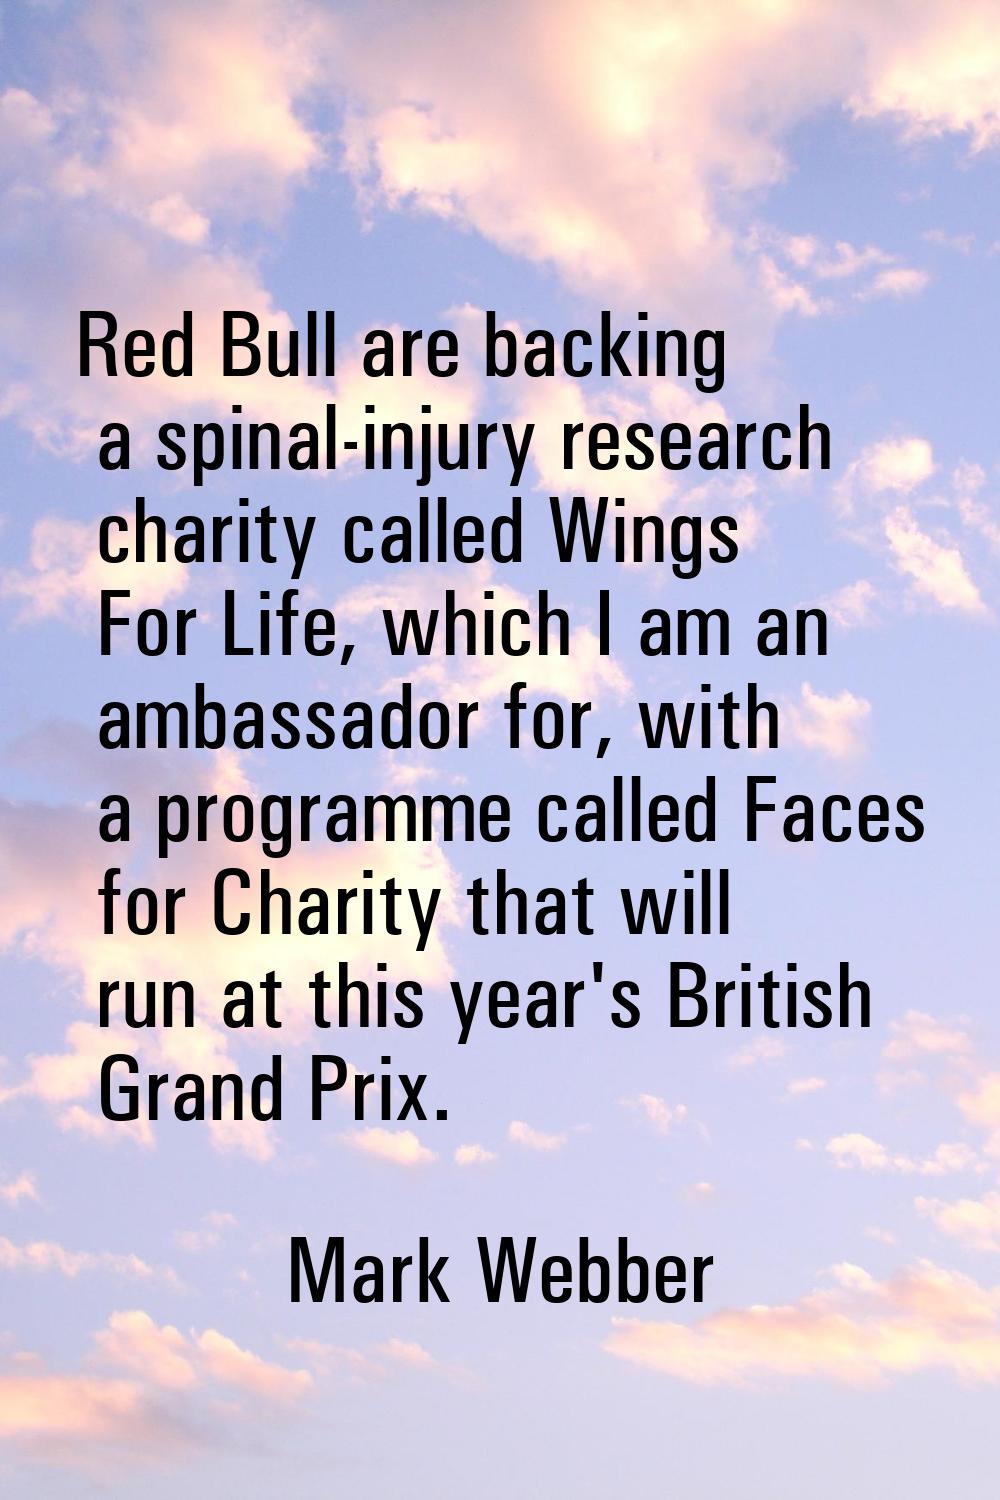 Red Bull are backing a spinal-injury research charity called Wings For Life, which I am an ambassad